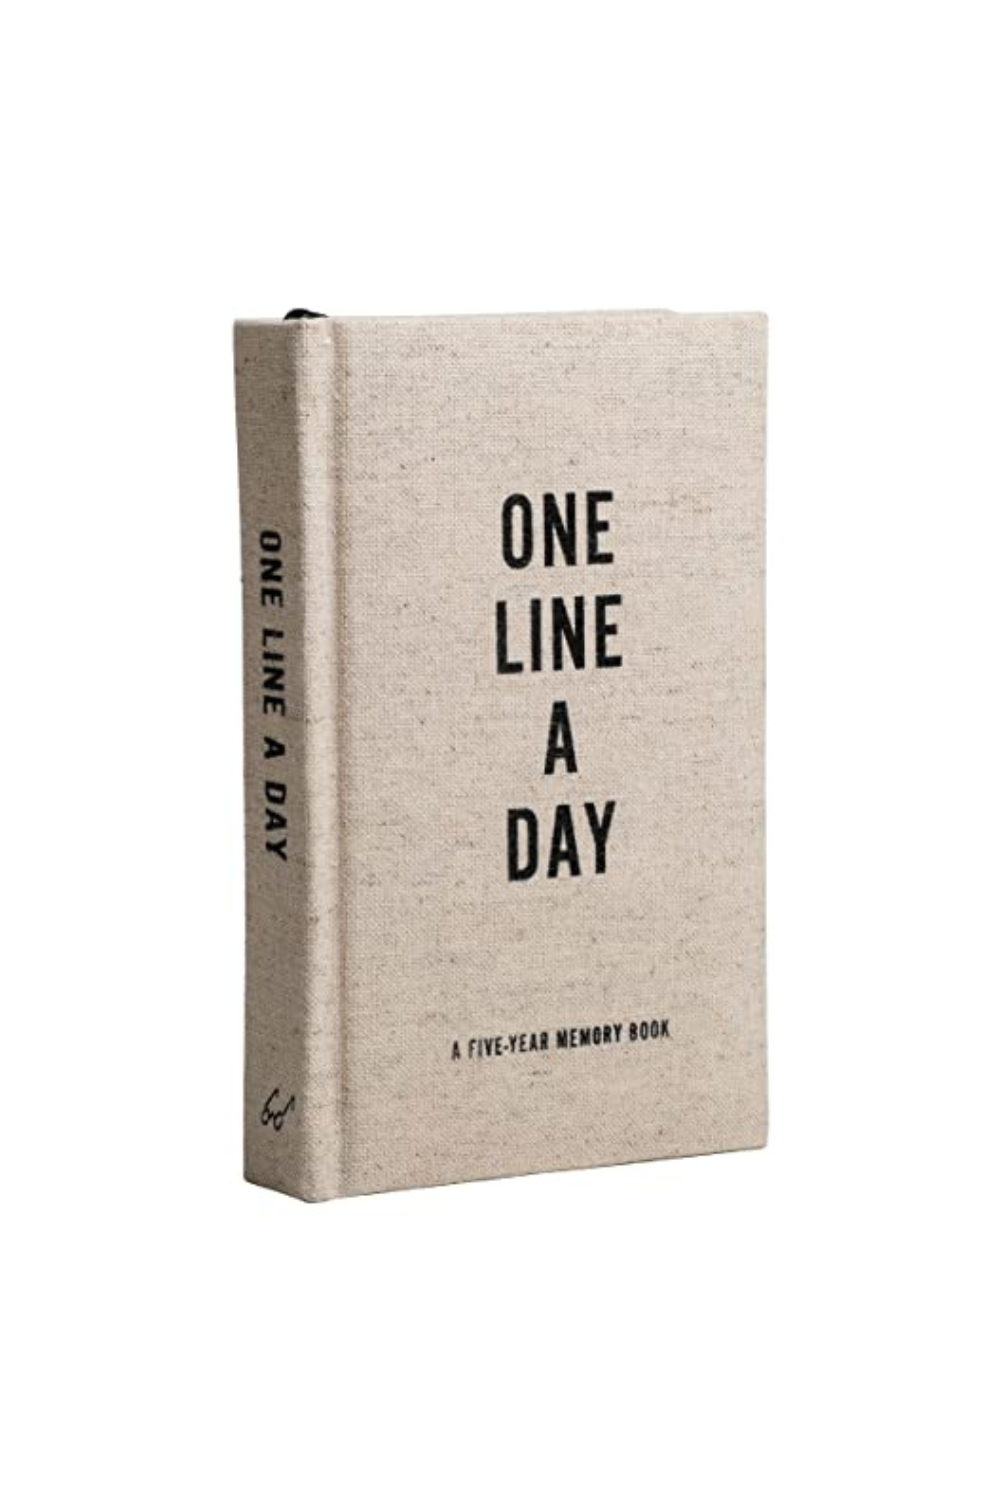 Book " One line a day" couverture, en lin beige